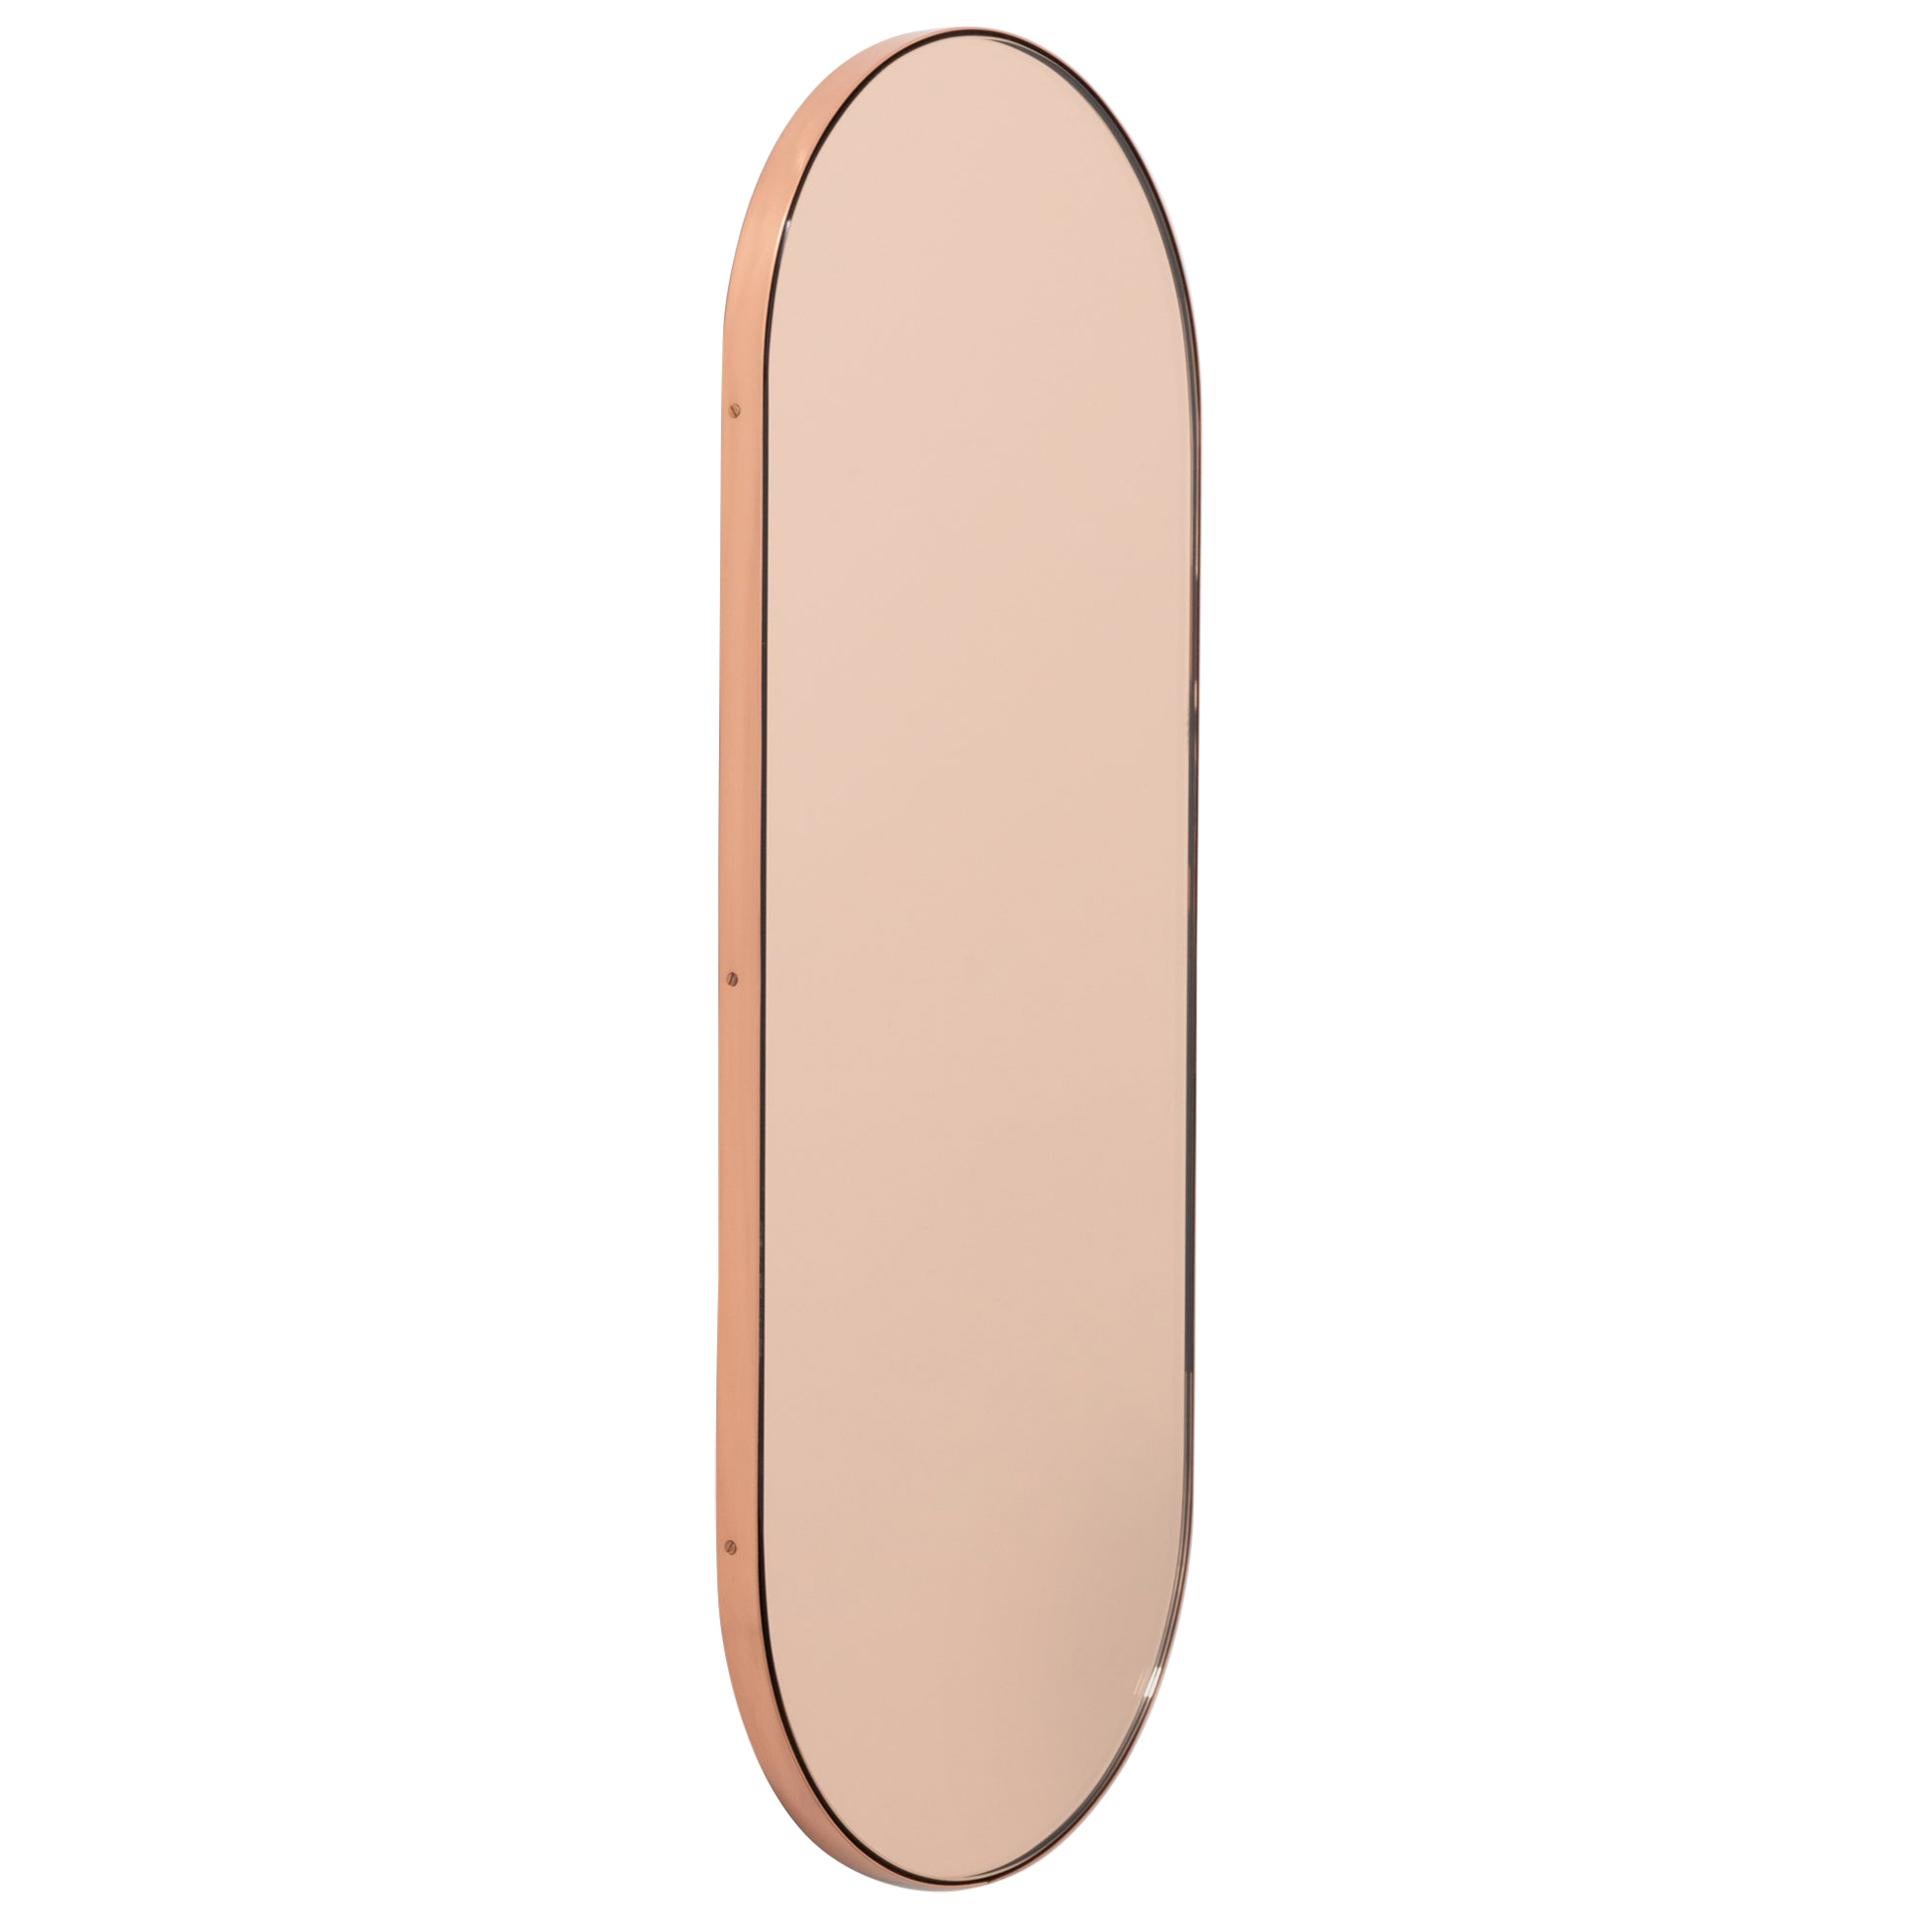 Capsula Capsule Pill Shaped Rose Gold Decorative Mirror with Copper Frame, Small